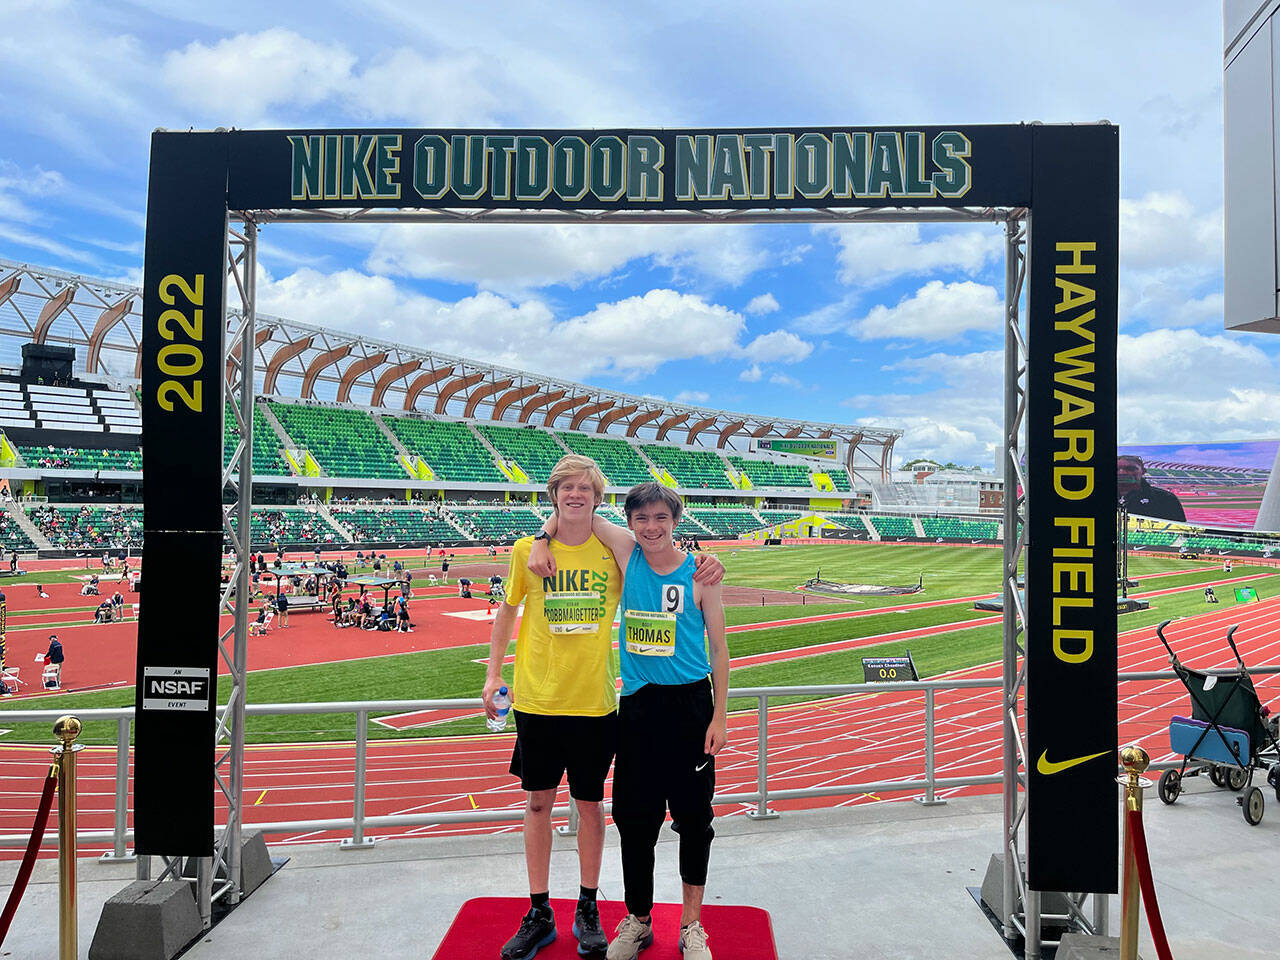 (Erin Schultz Photo) Eighth-graders Oskar CobbMaigetter (left) and Bodie Thomas (right) at Hayward Field.